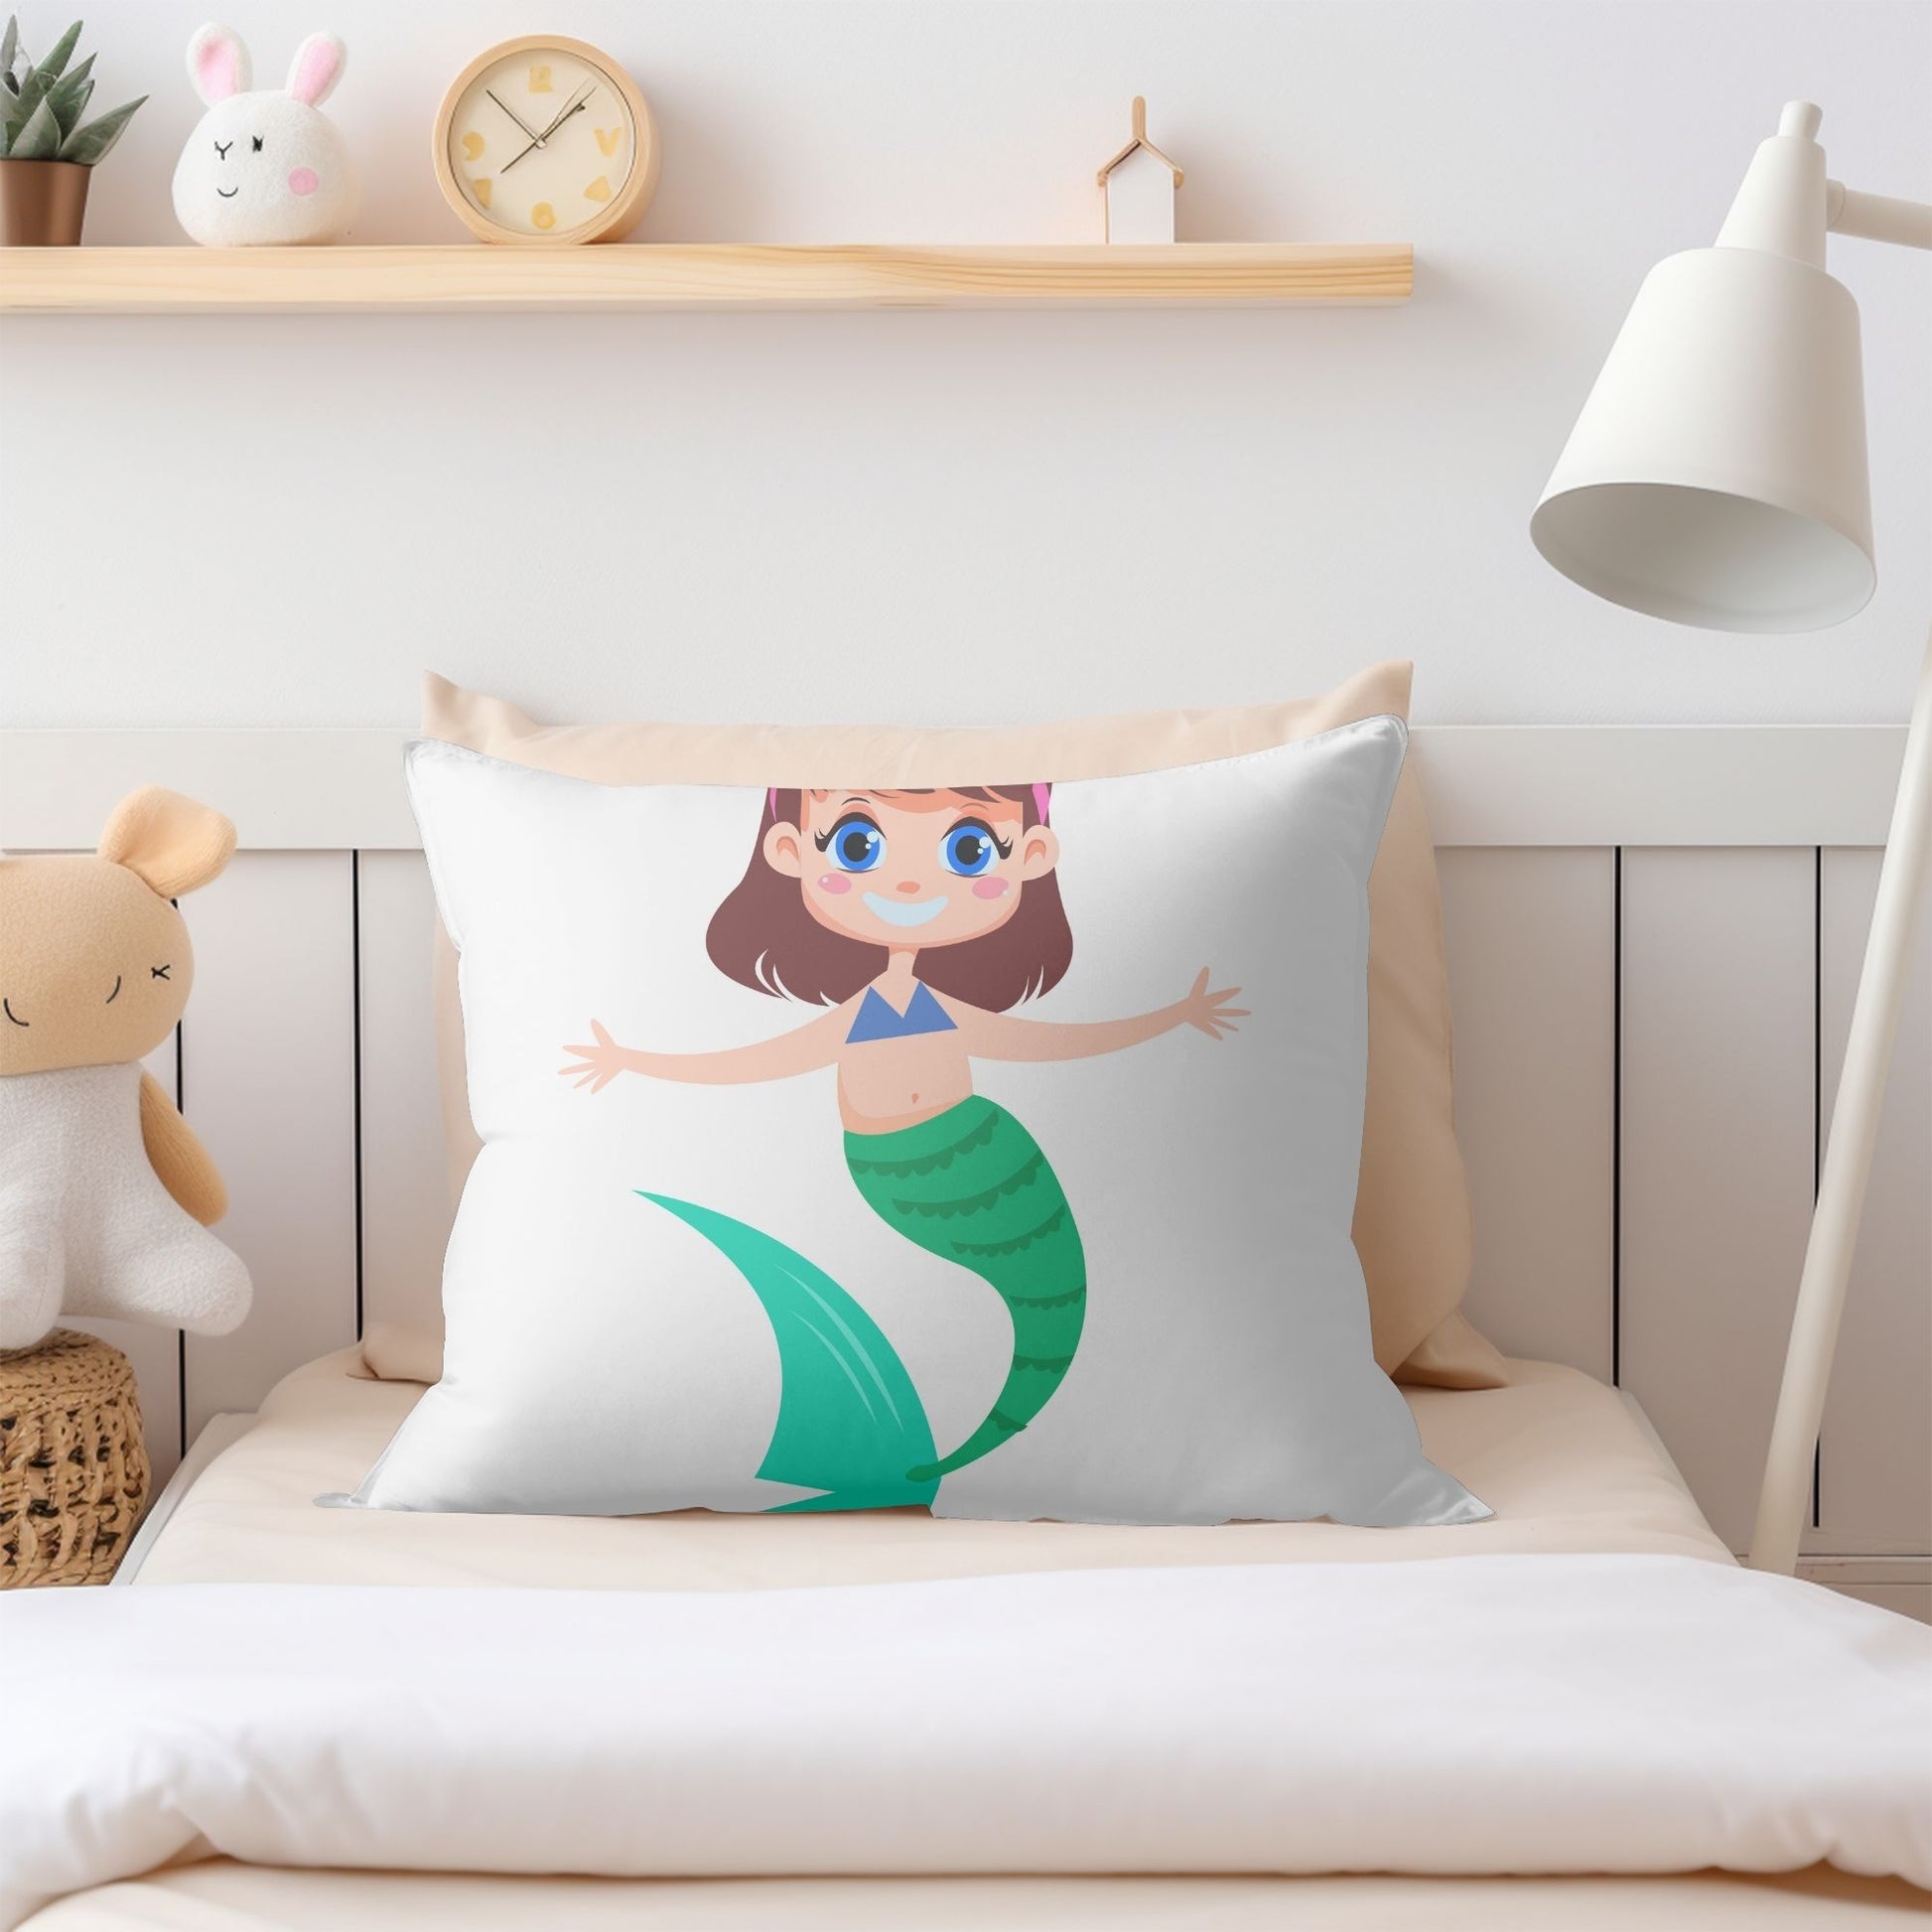 Fun-filled pillow showcasing a mermaid for girls' spaces.